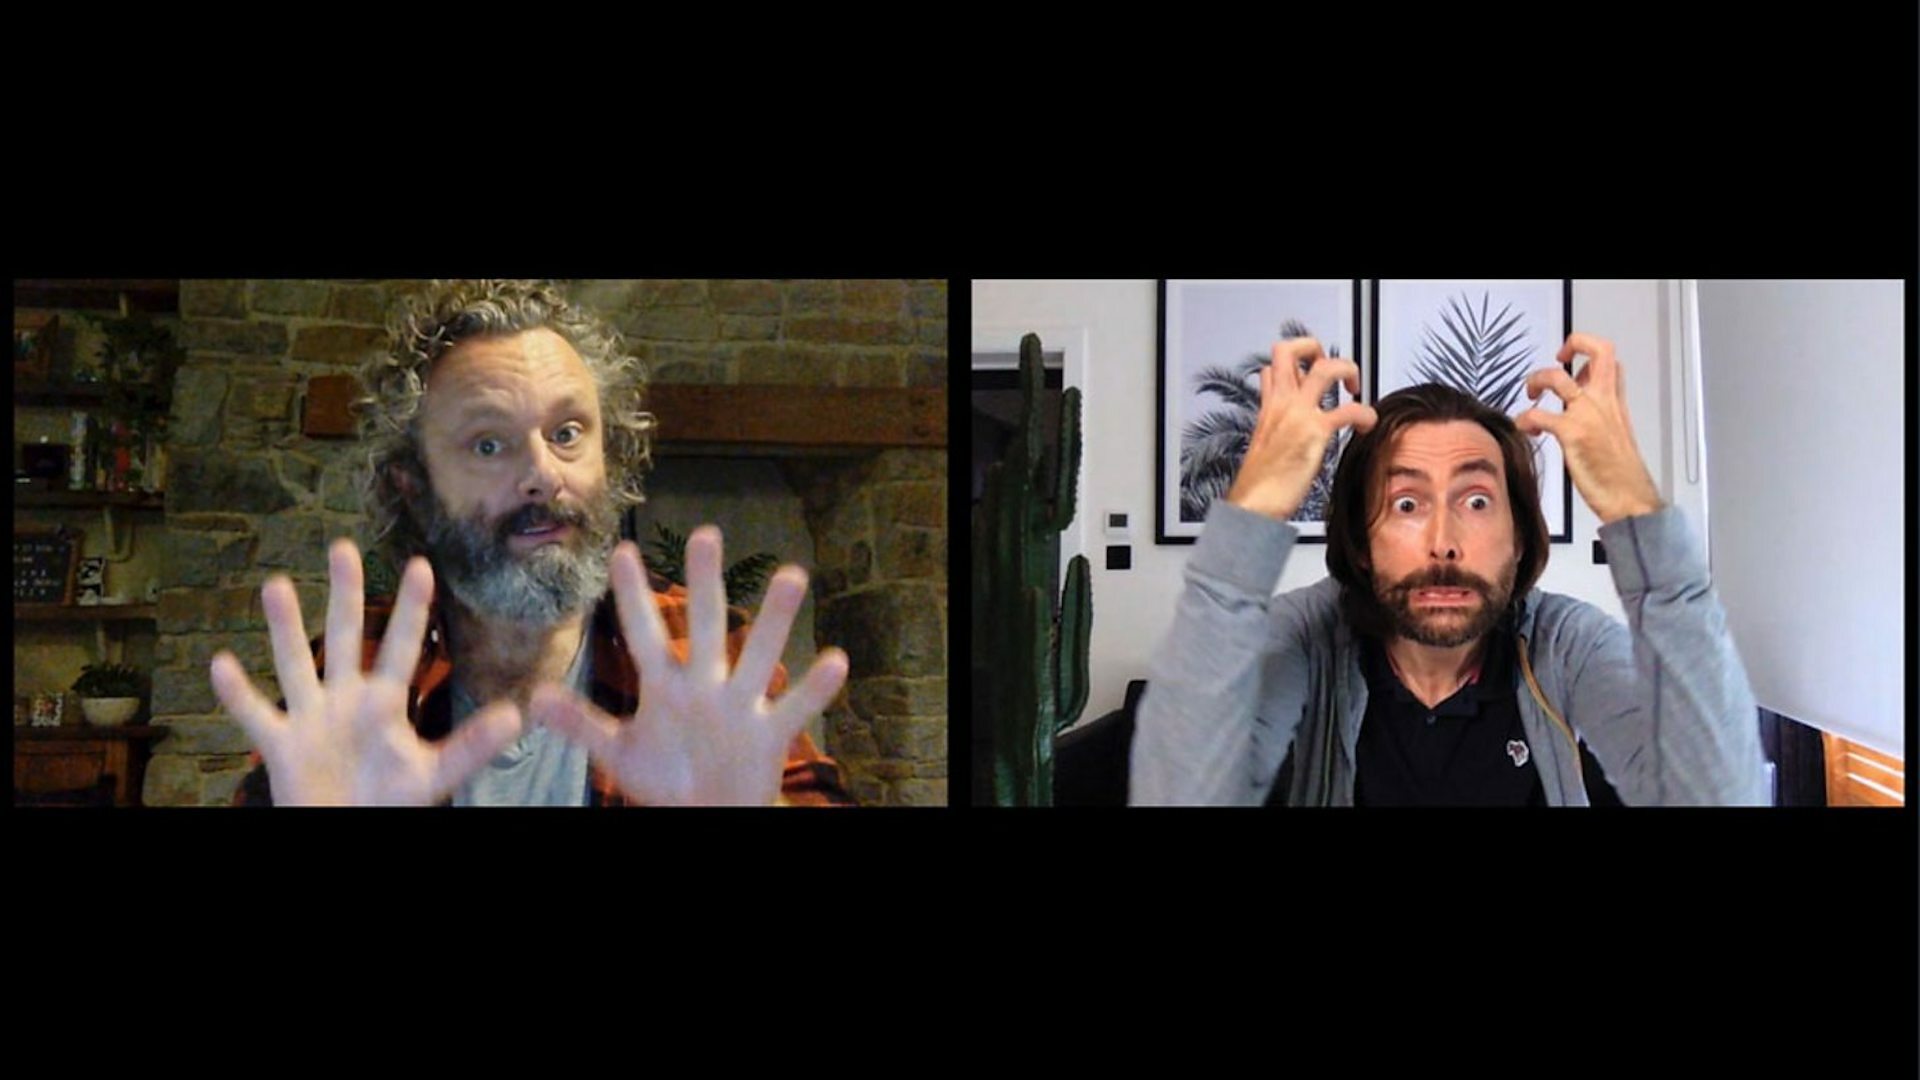 Michael Sheen and David Tennant on a video call in "Staged"